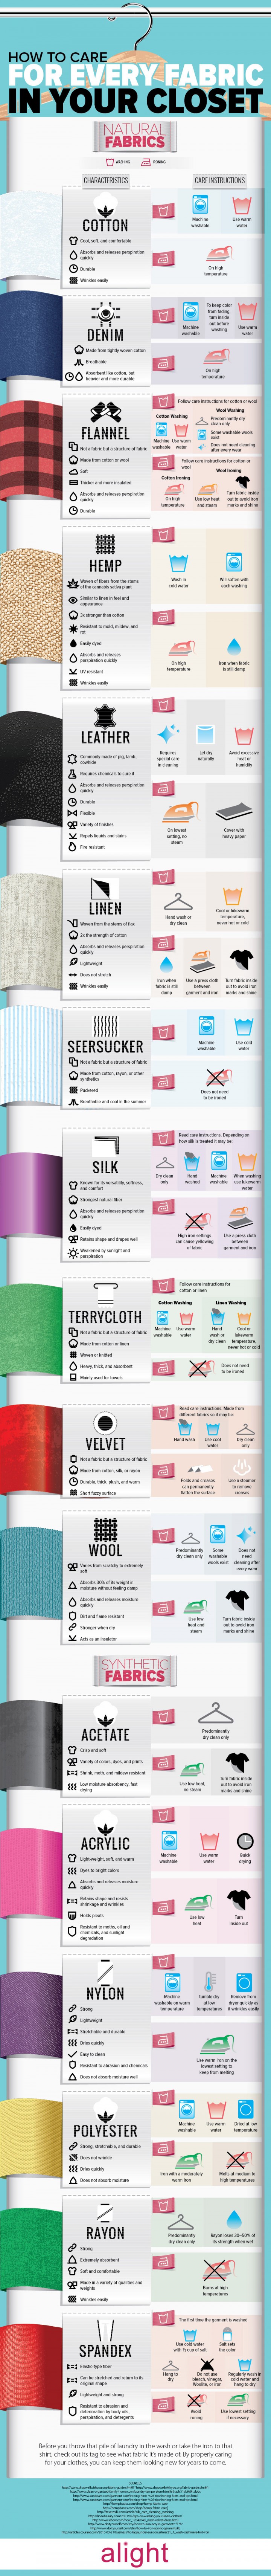 Best Ways to Care for Every Piece of Fabric in Your Laundry